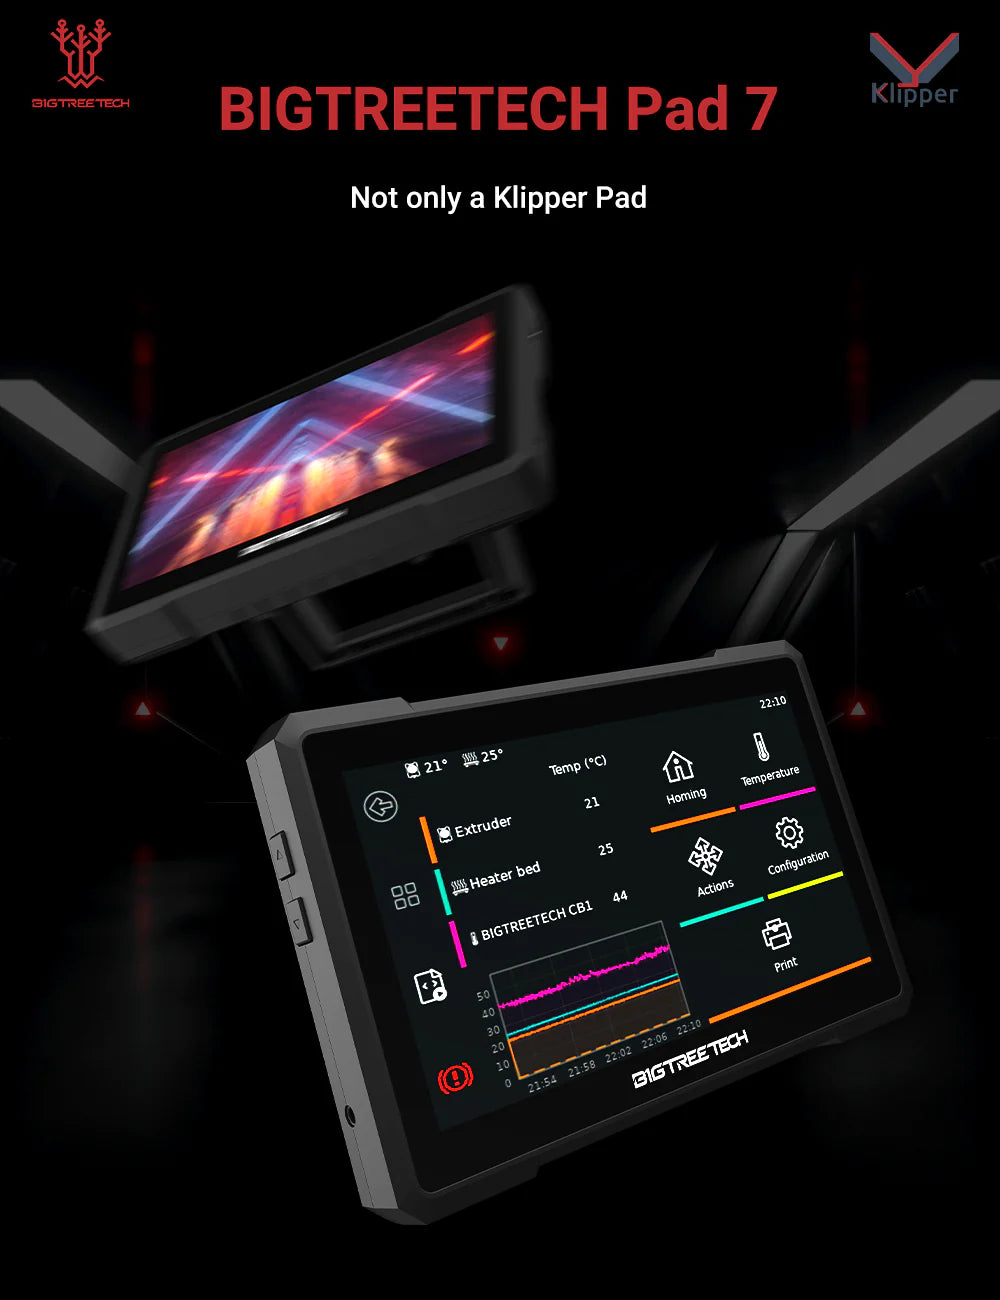 BIGTREETECH Pad 7 with Pre-installed CB1 Core Board for Running Klipper